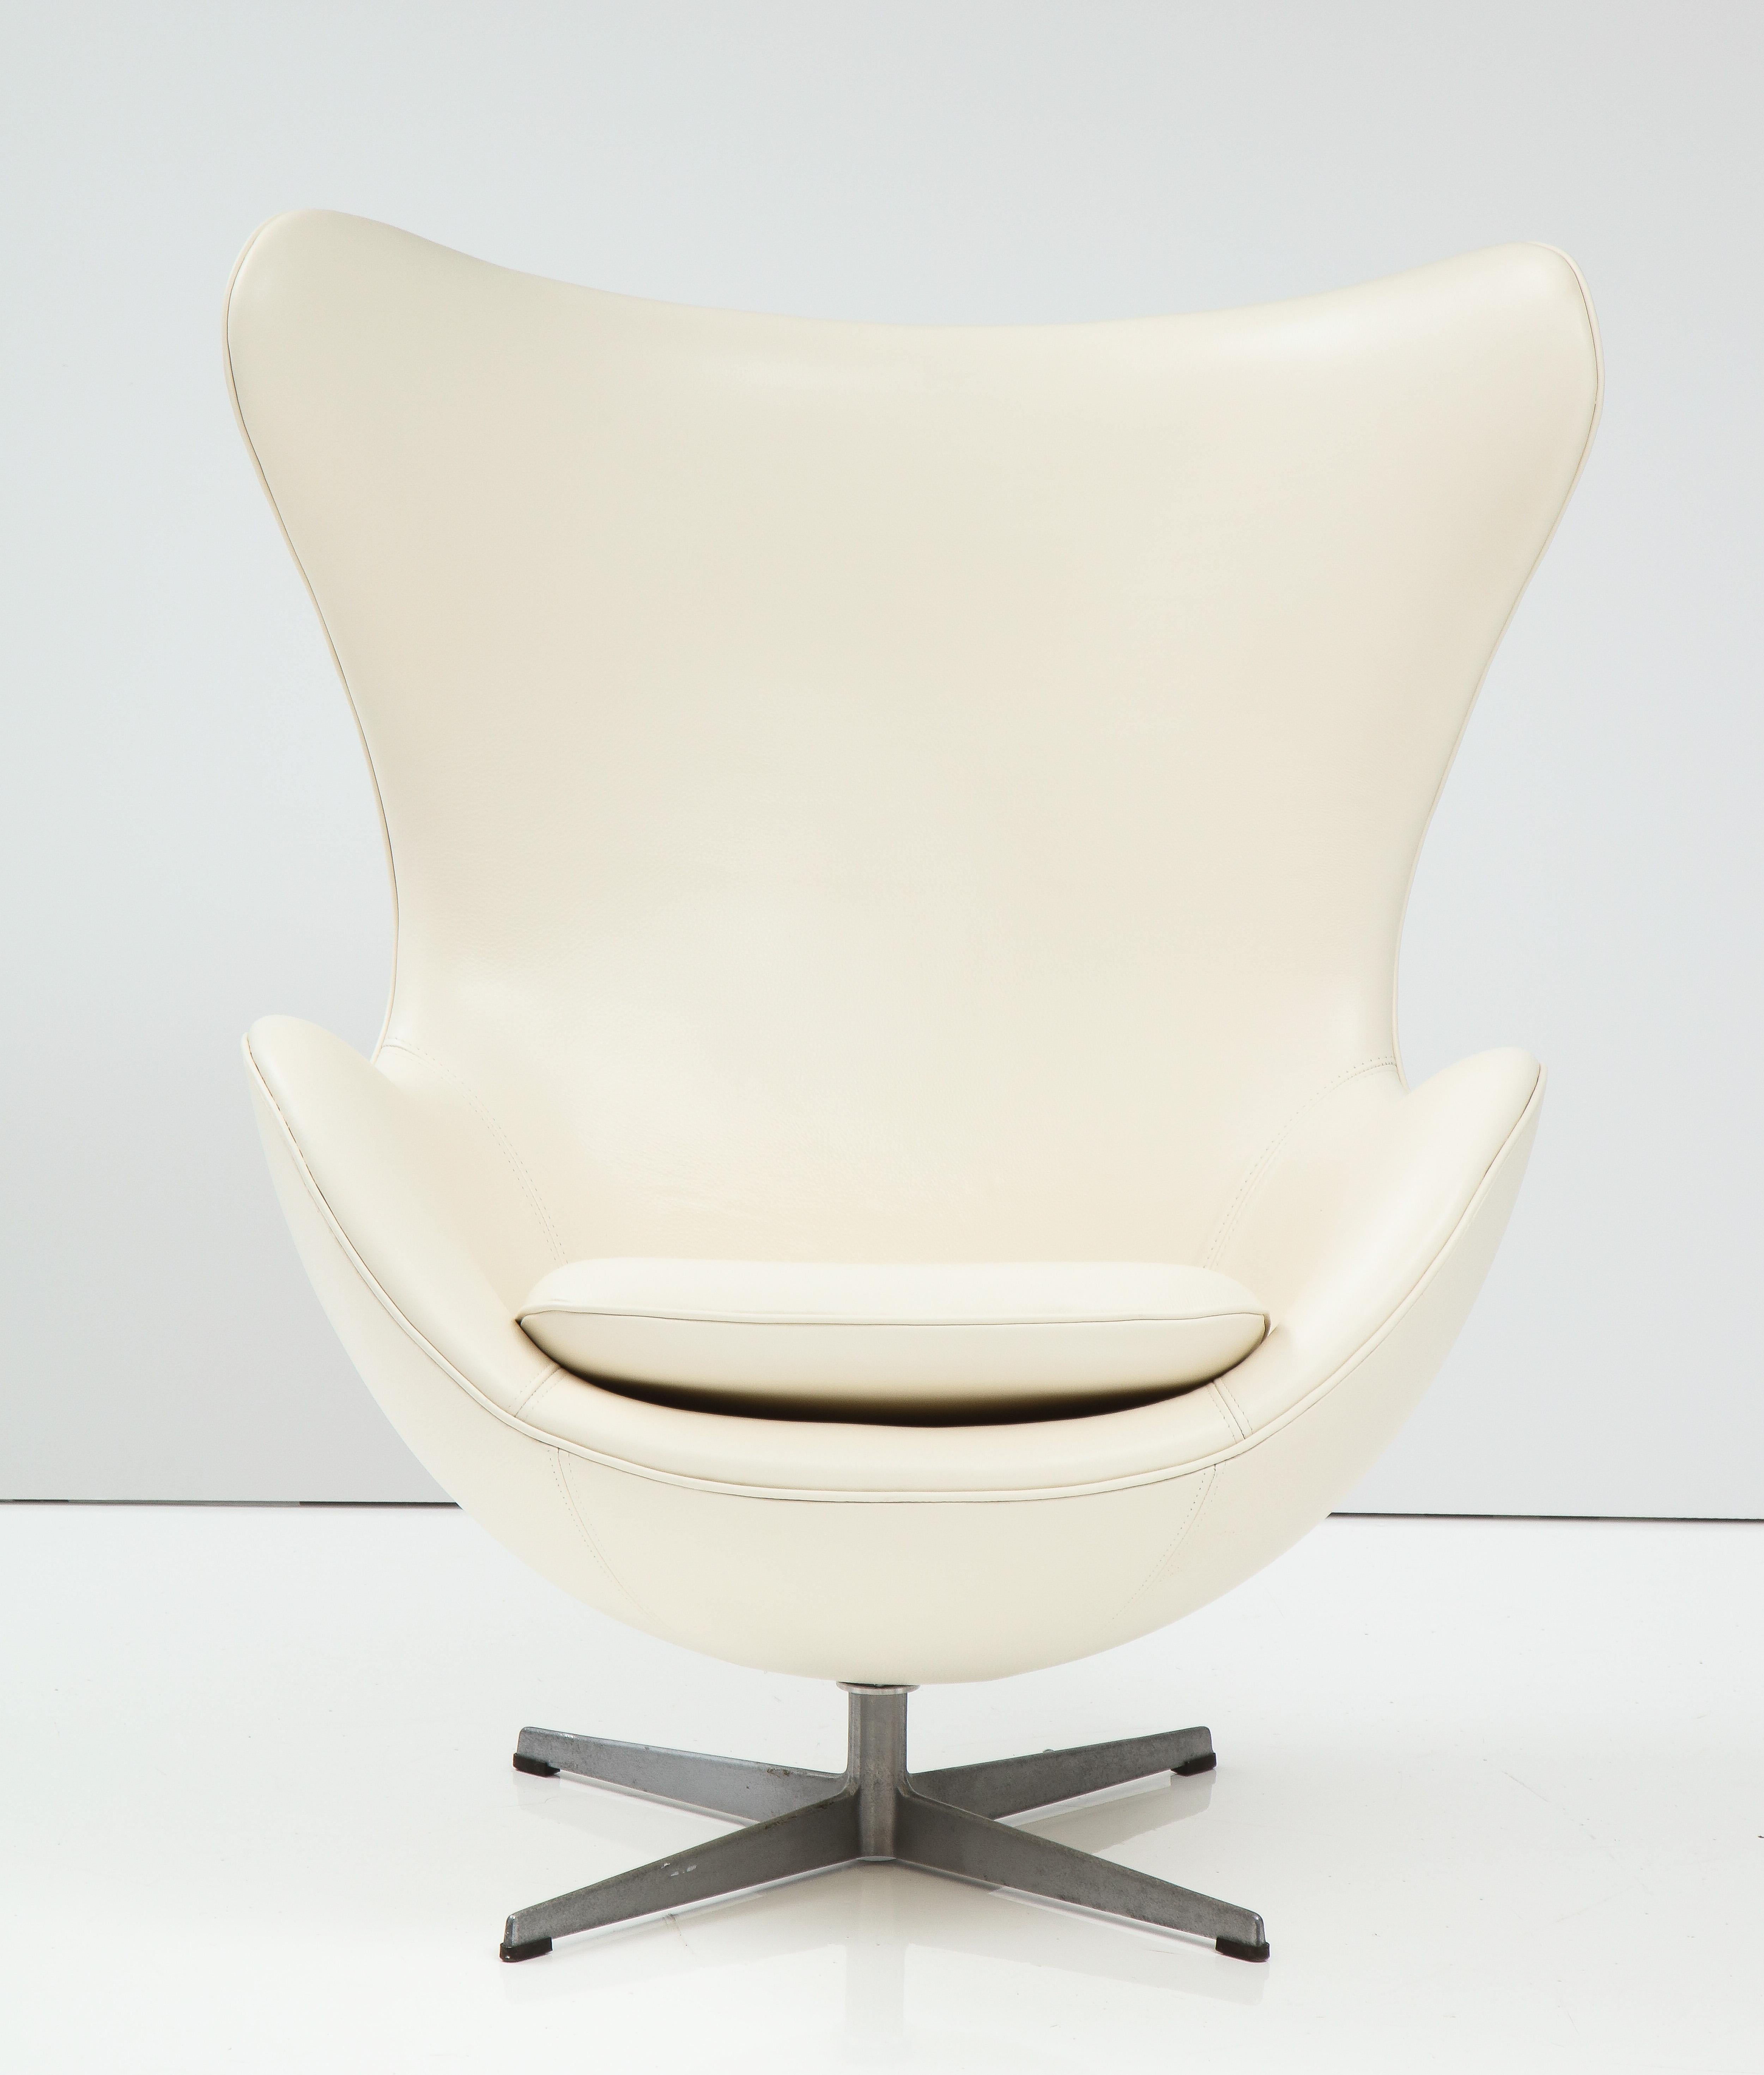 The classic and iconic 'Egg' chair designed by Arne Jacobsen for Fritz Hansen, Denmark, 1967. Newly refurbished and reupholstered in a luxurious creamy/white leather from Maharam. 
Made in Denmark by Fritz Hansen, 1967
Labeled and numbered. 

The